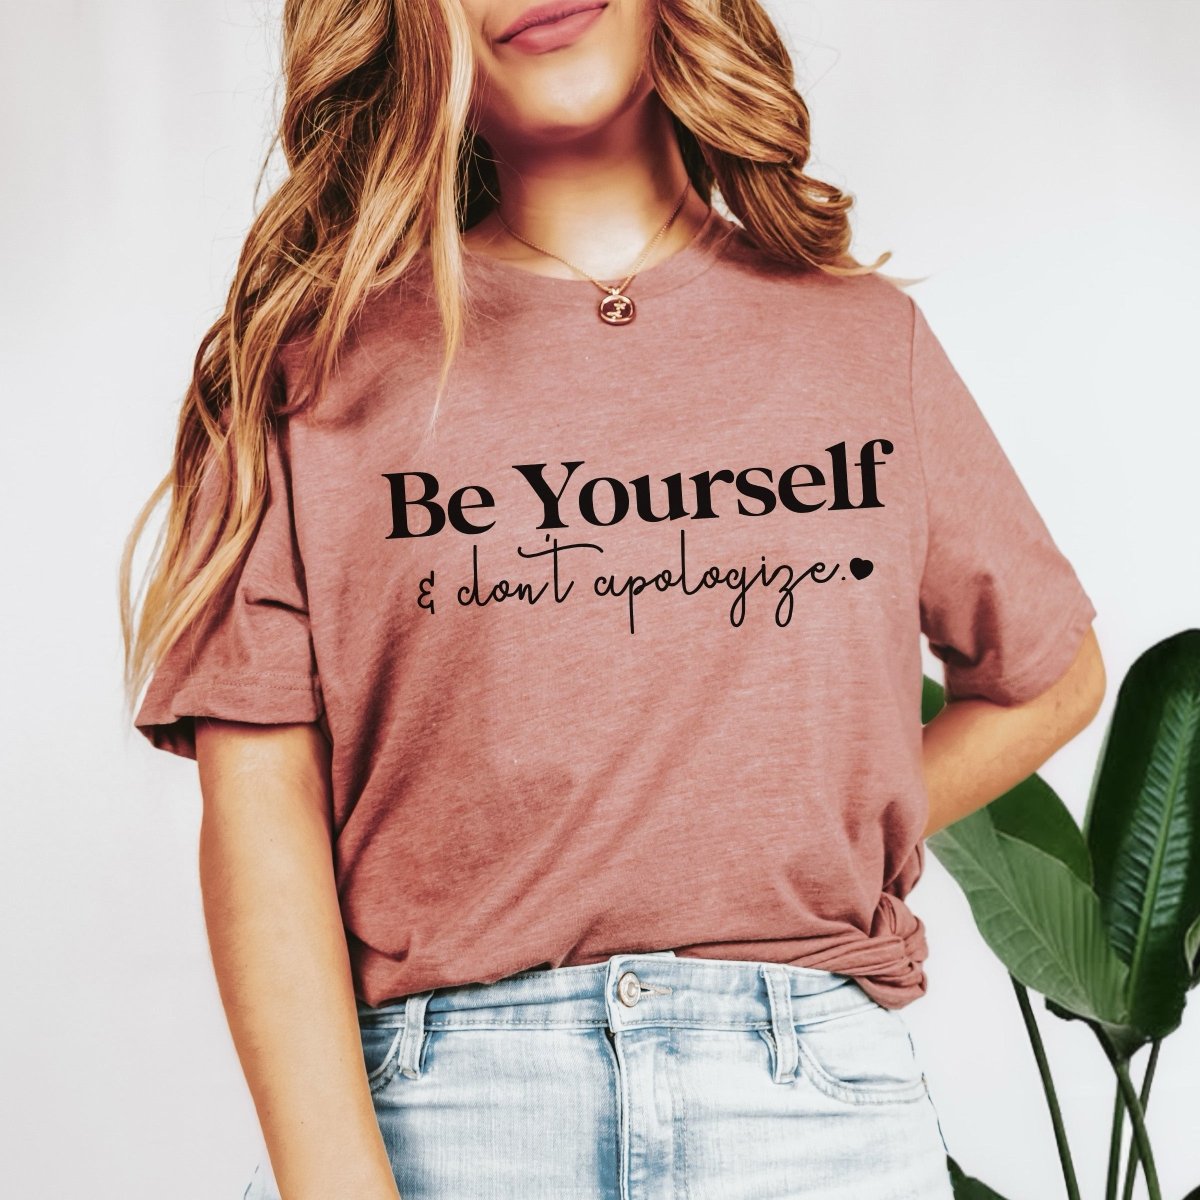 Be Yourself Don't Appologize Wholesale Tee - Limeberry Designs